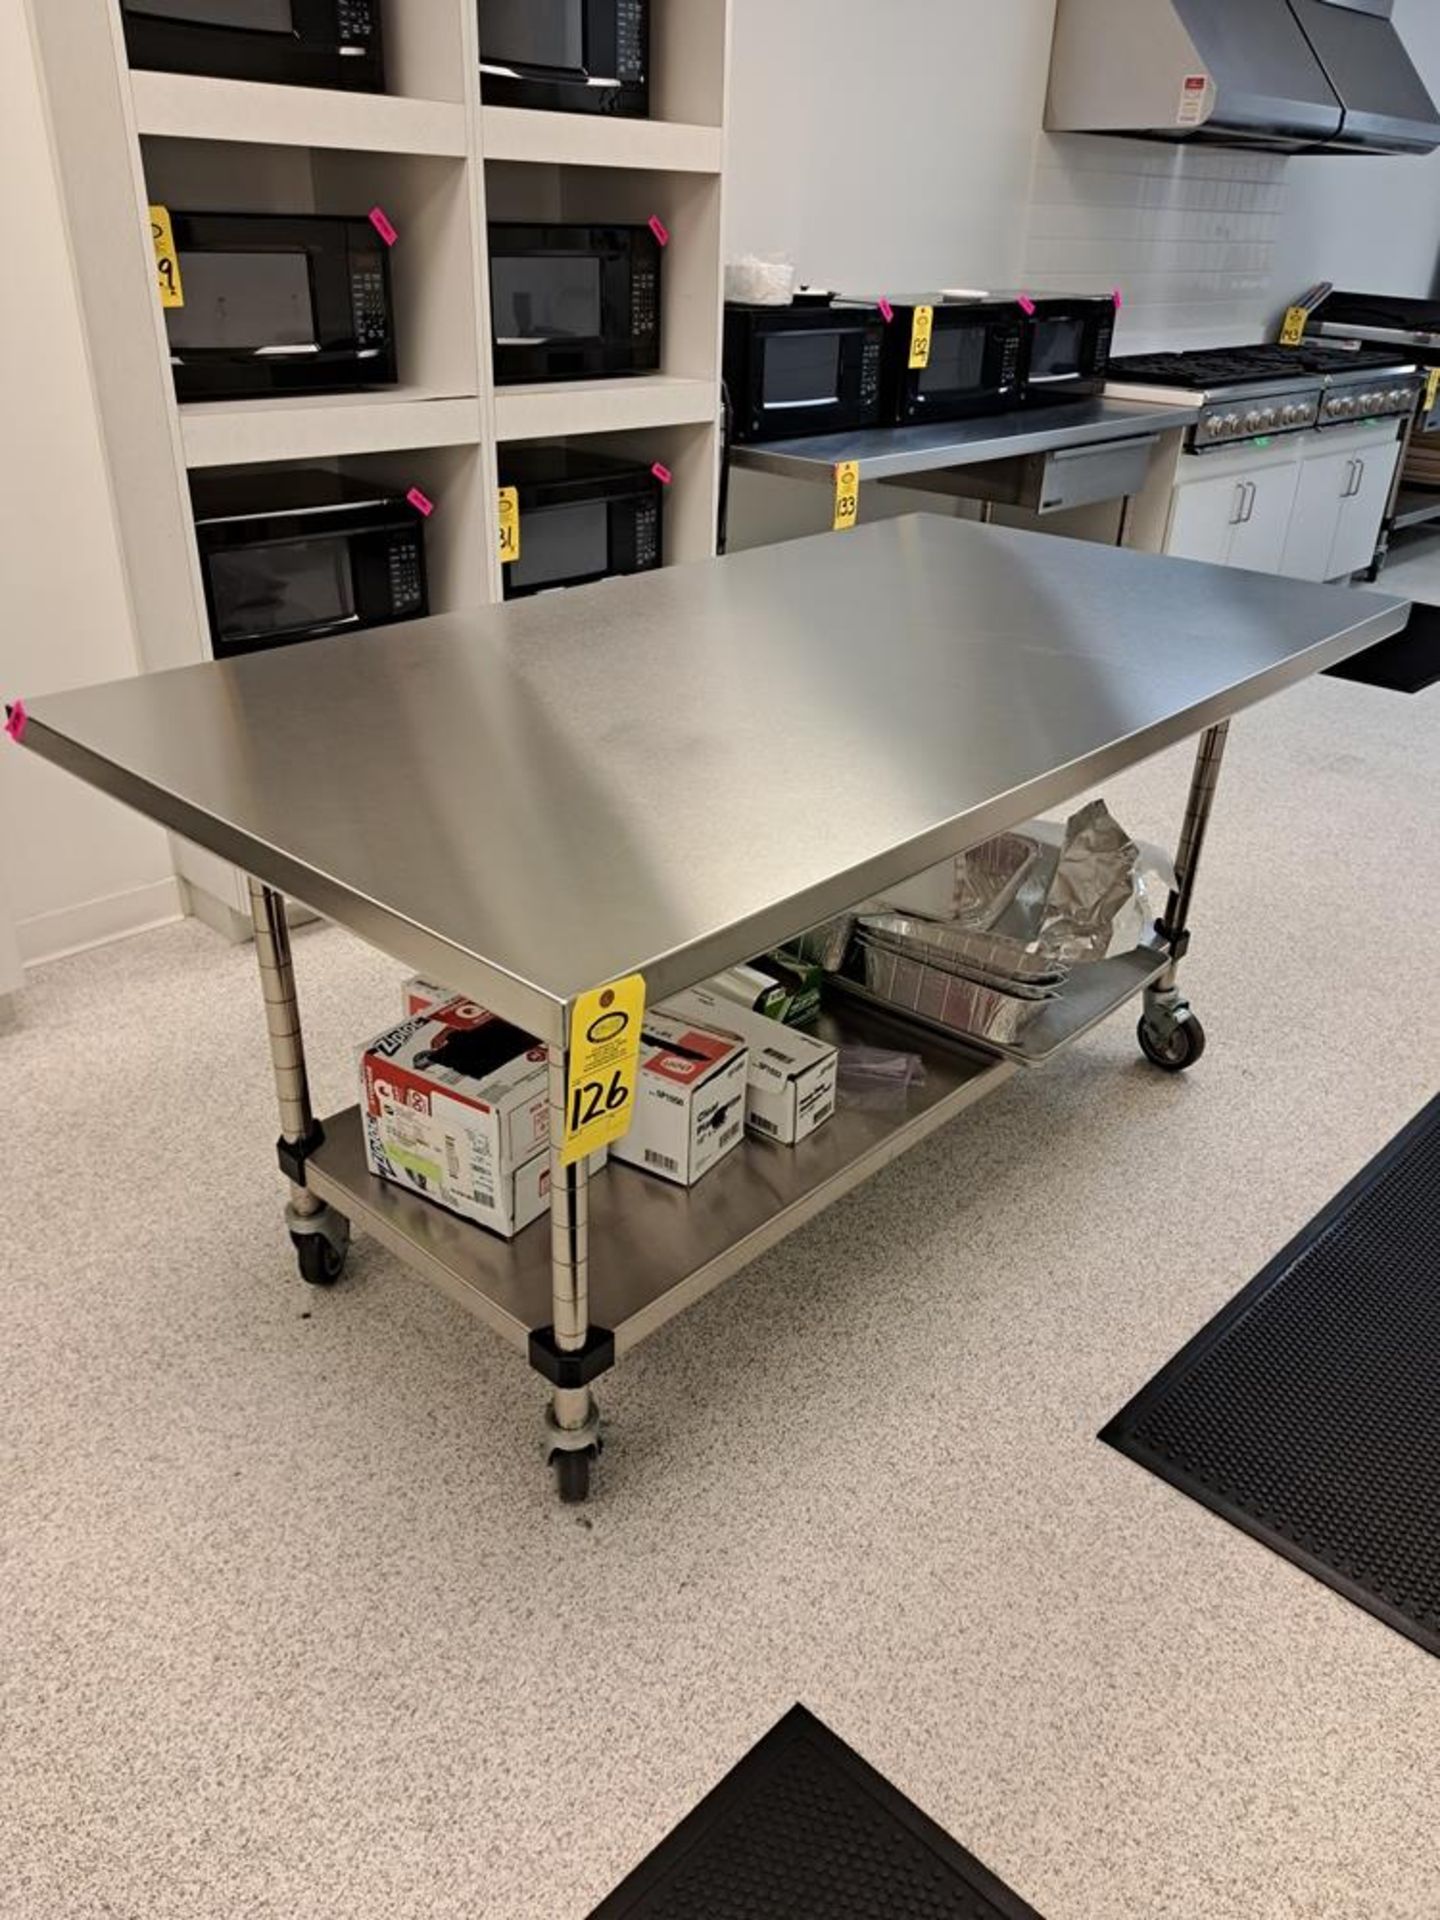 Portable Stainless Steel Table, 38" W X 6' L X 35" T bottom shelf-Removal Is By Appointment Only-All